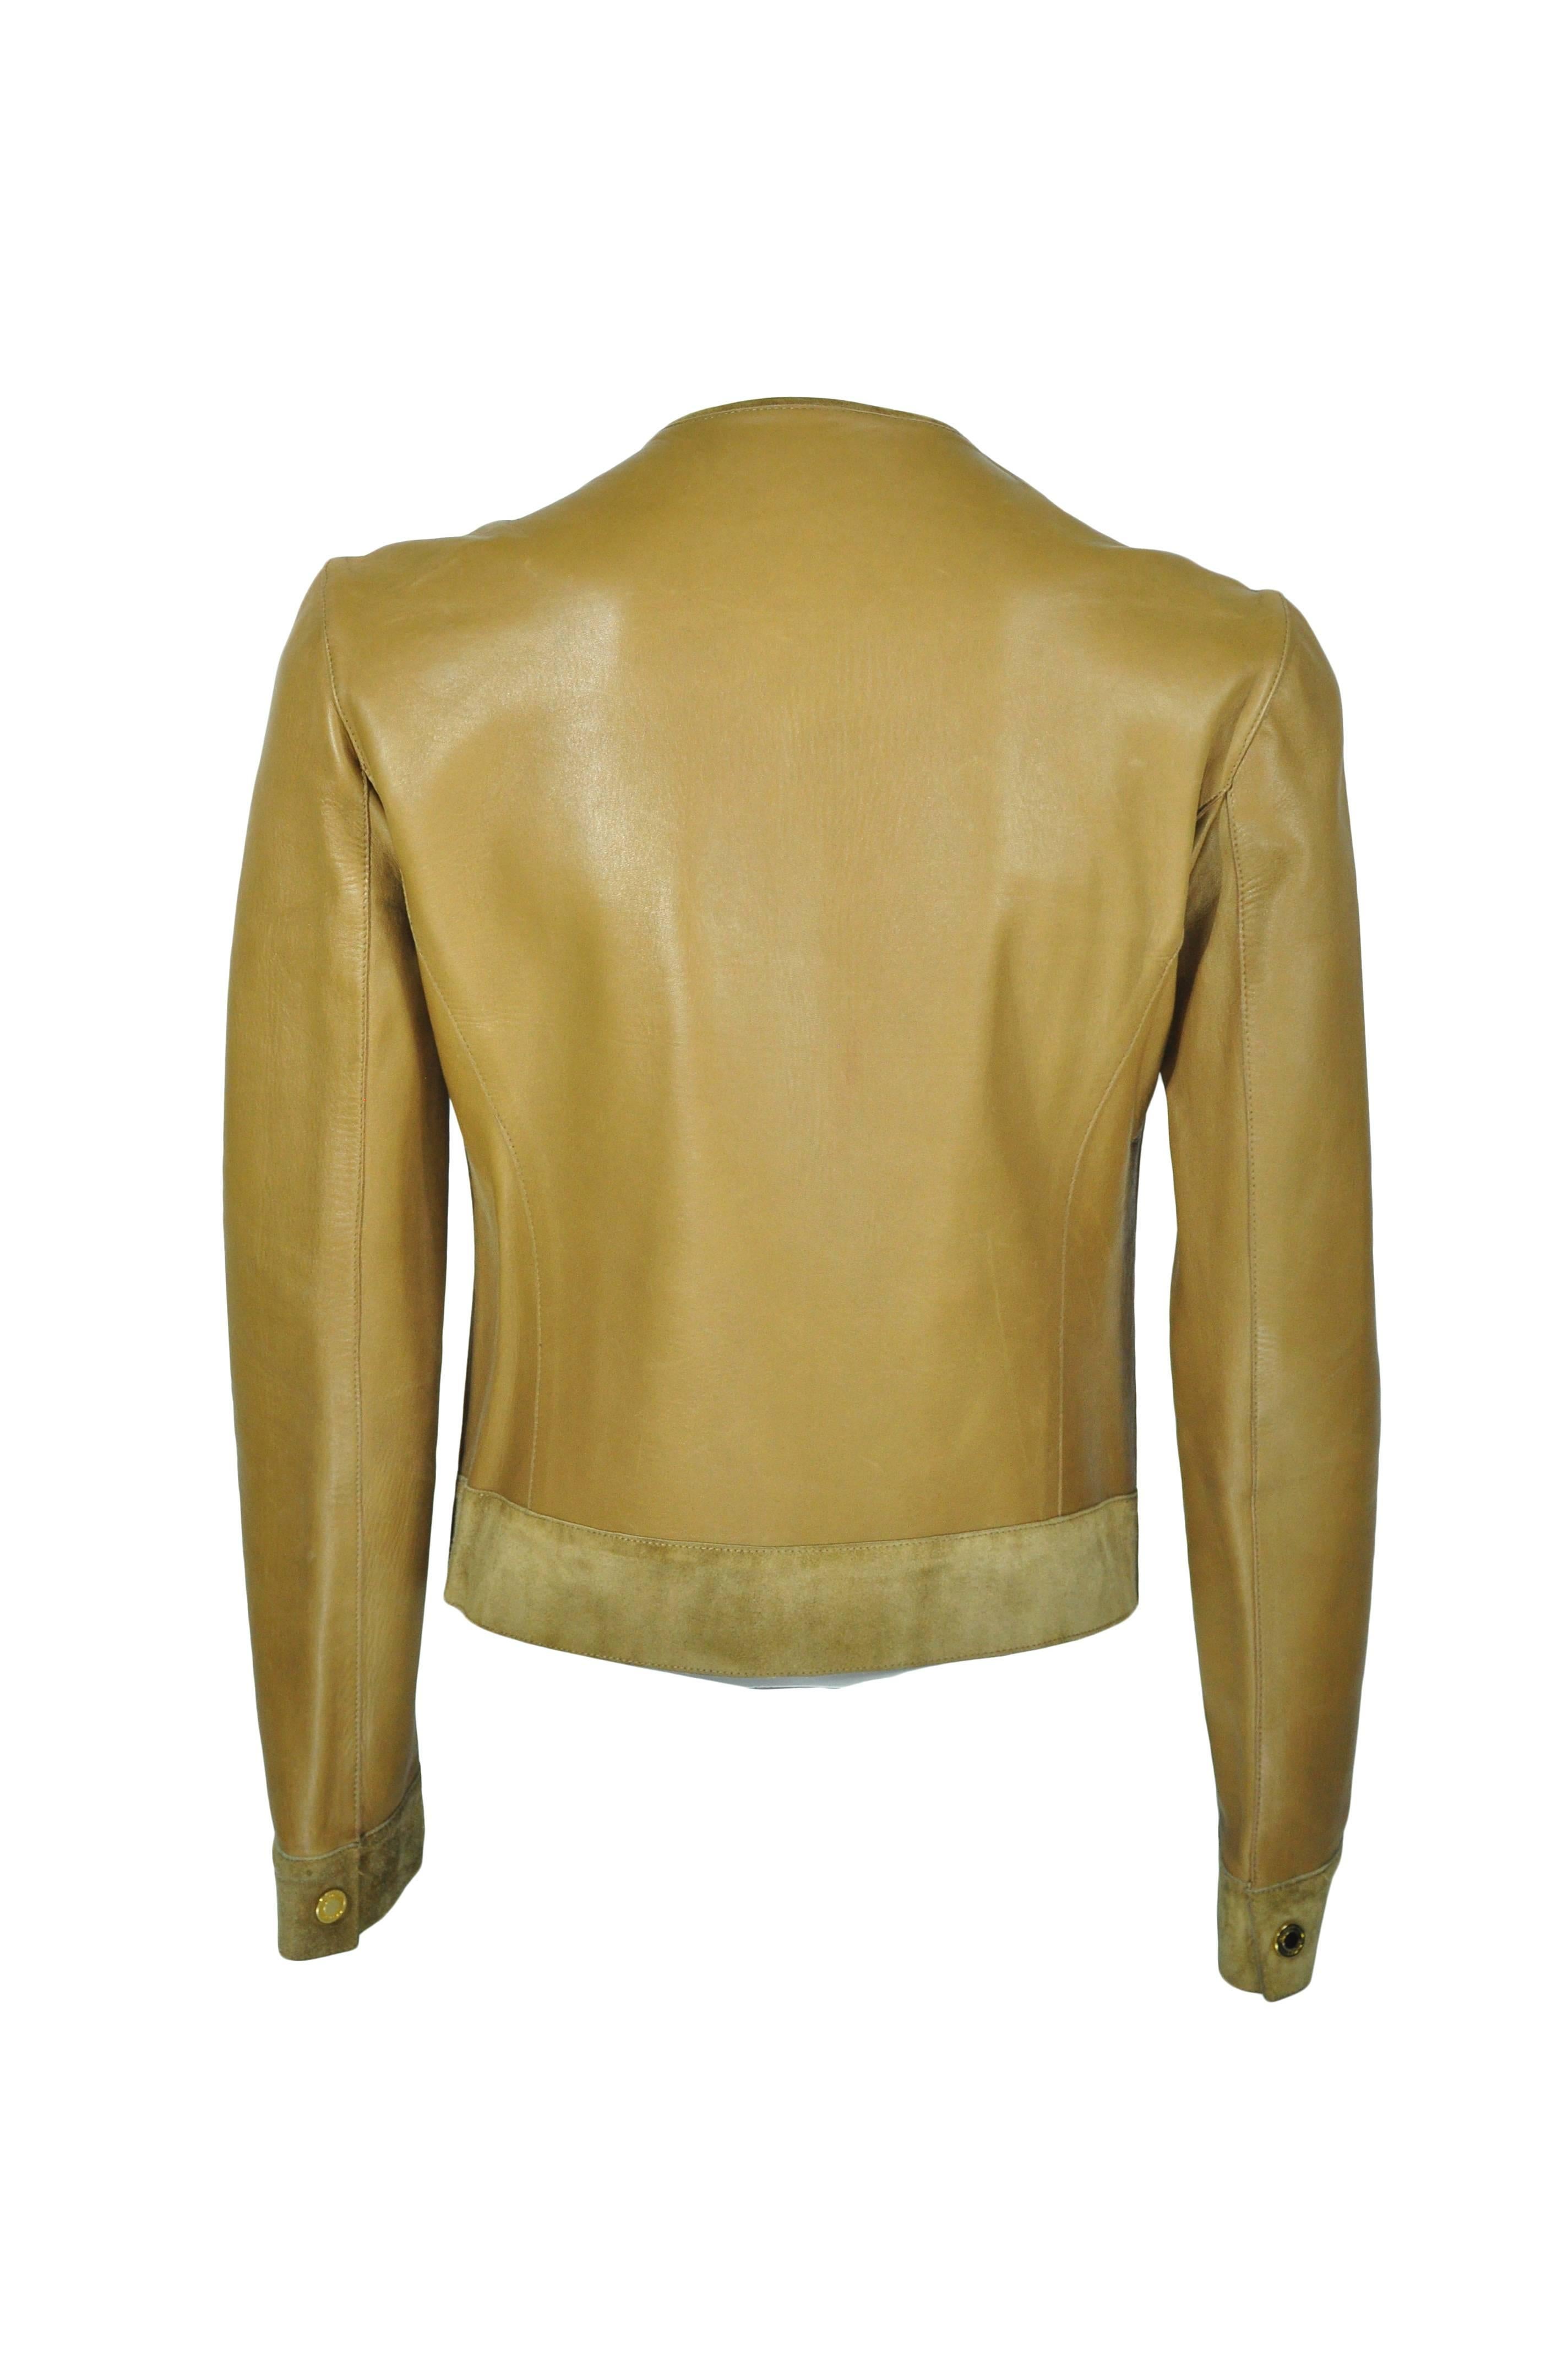 This vintage jacket is designed by Tom Ford in the 90' and made of Khaki leather with two large suede snap pockets at front, suede cuffs and hem, zip fastening through front.